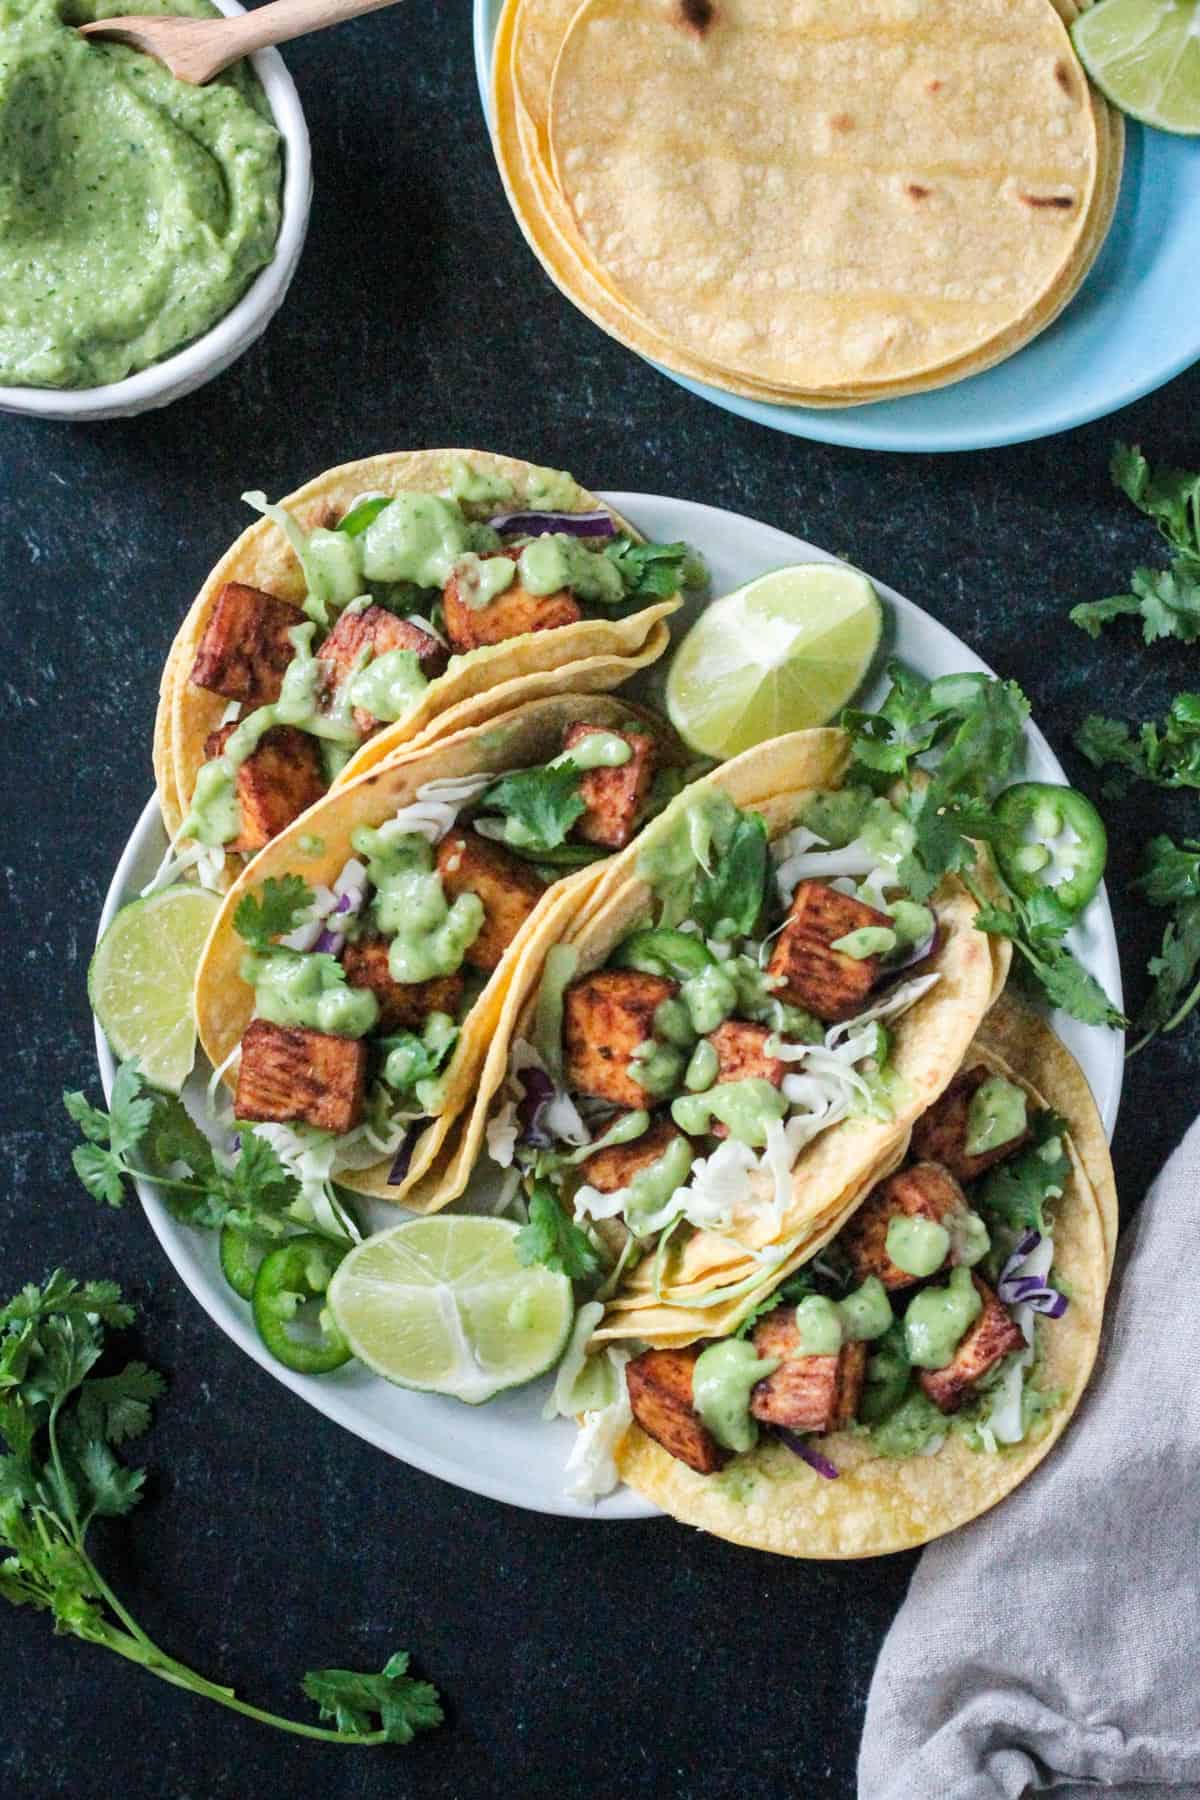 Four tacos on a plate topped with shredded cabbage, cilantro, and creamy avocado sauce.